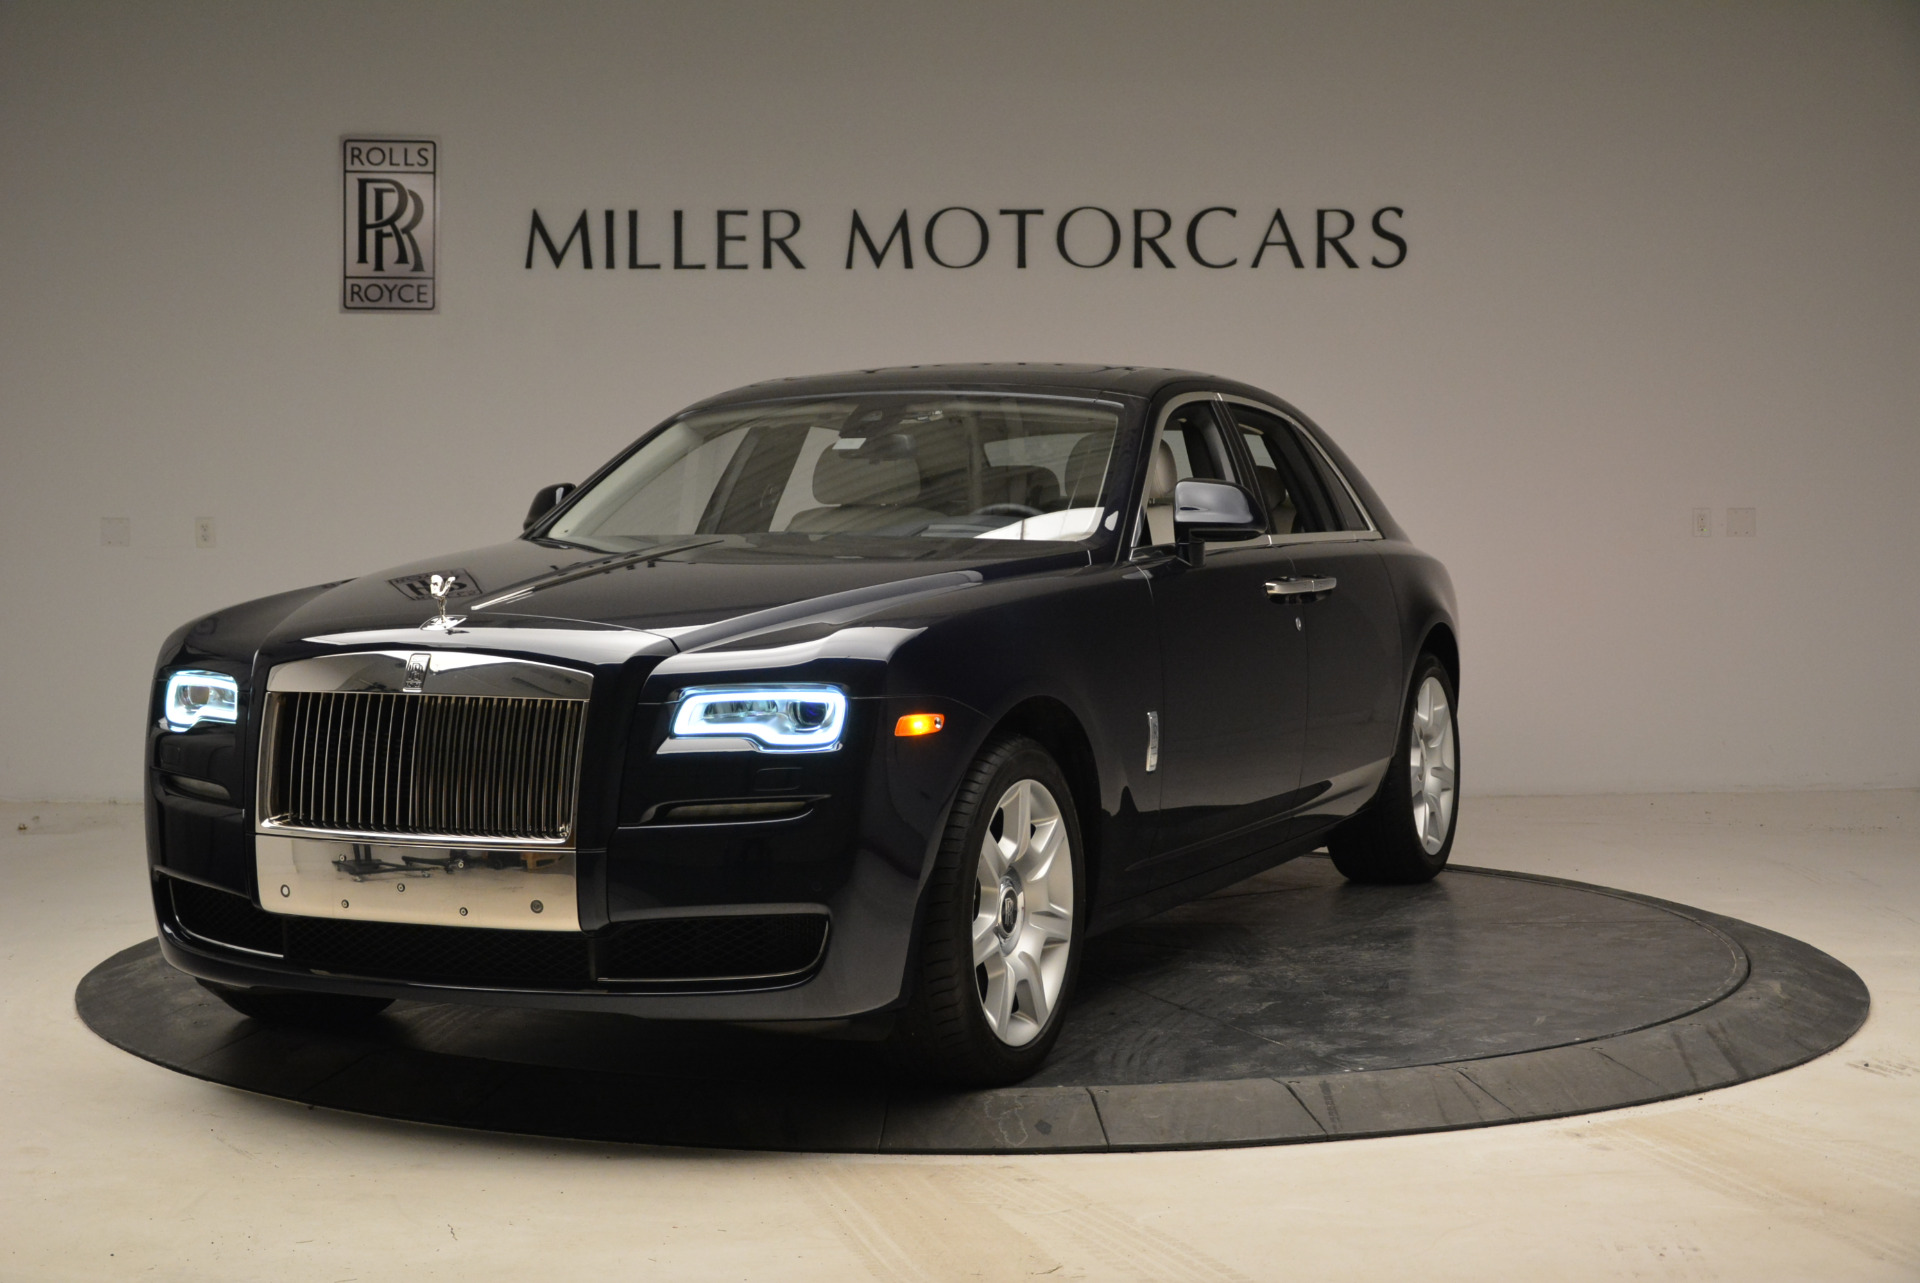 PreOwned 2015 RollsRoyce Ghost For Sale () Miller Motorcars Stock 7721A